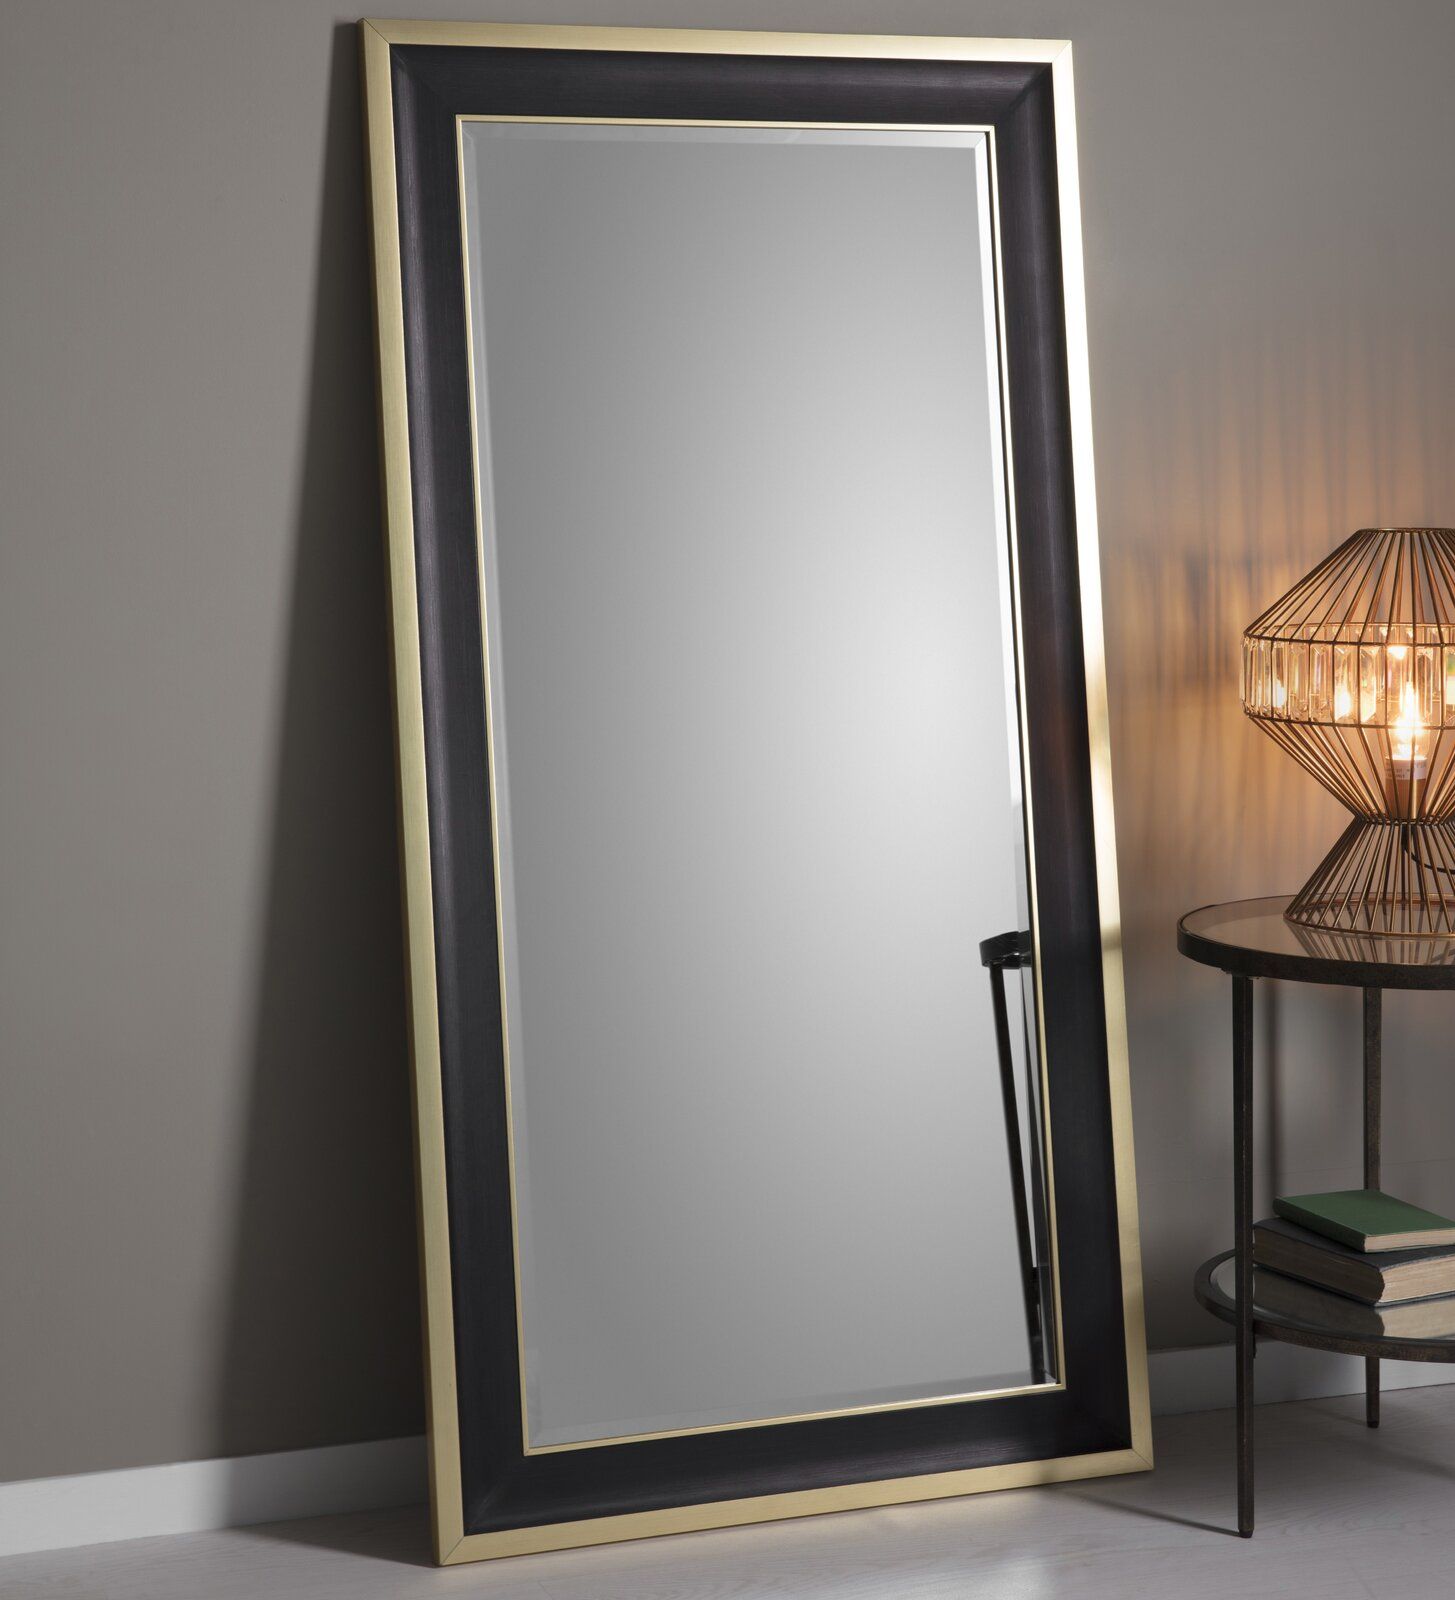 What Is An Infinity Mirror And How Can I Use One In My Home? - Mirrorwalla